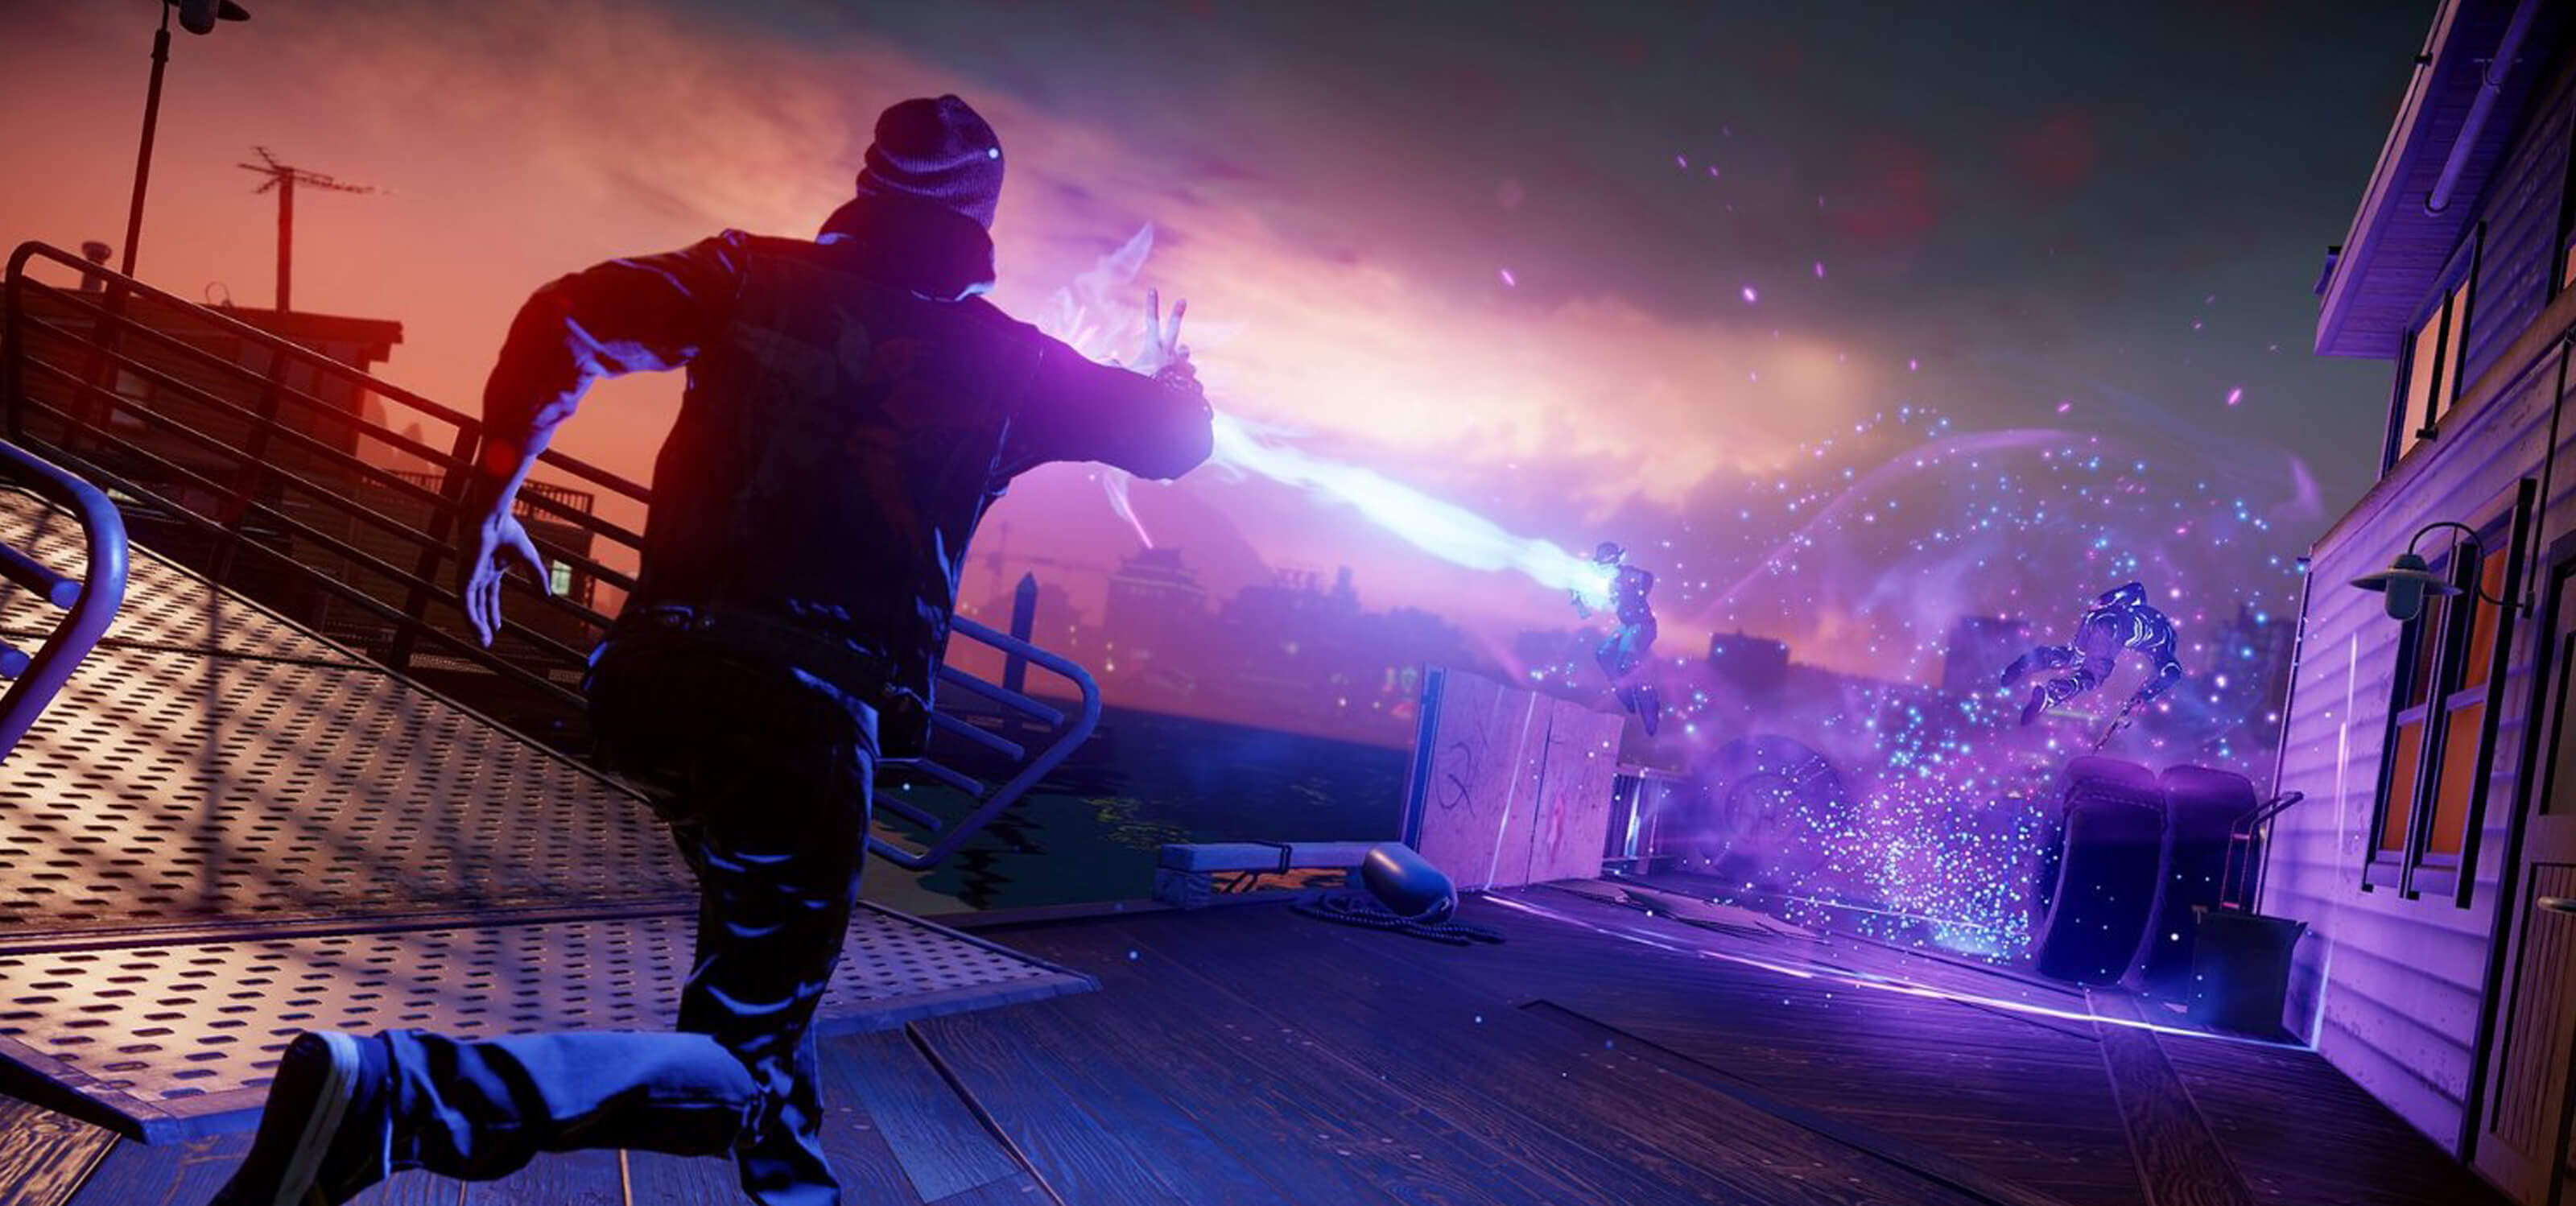 Screenshot of Infamous Second Son protagonist Delsin Rowe on a dock at night, running toward two assailants